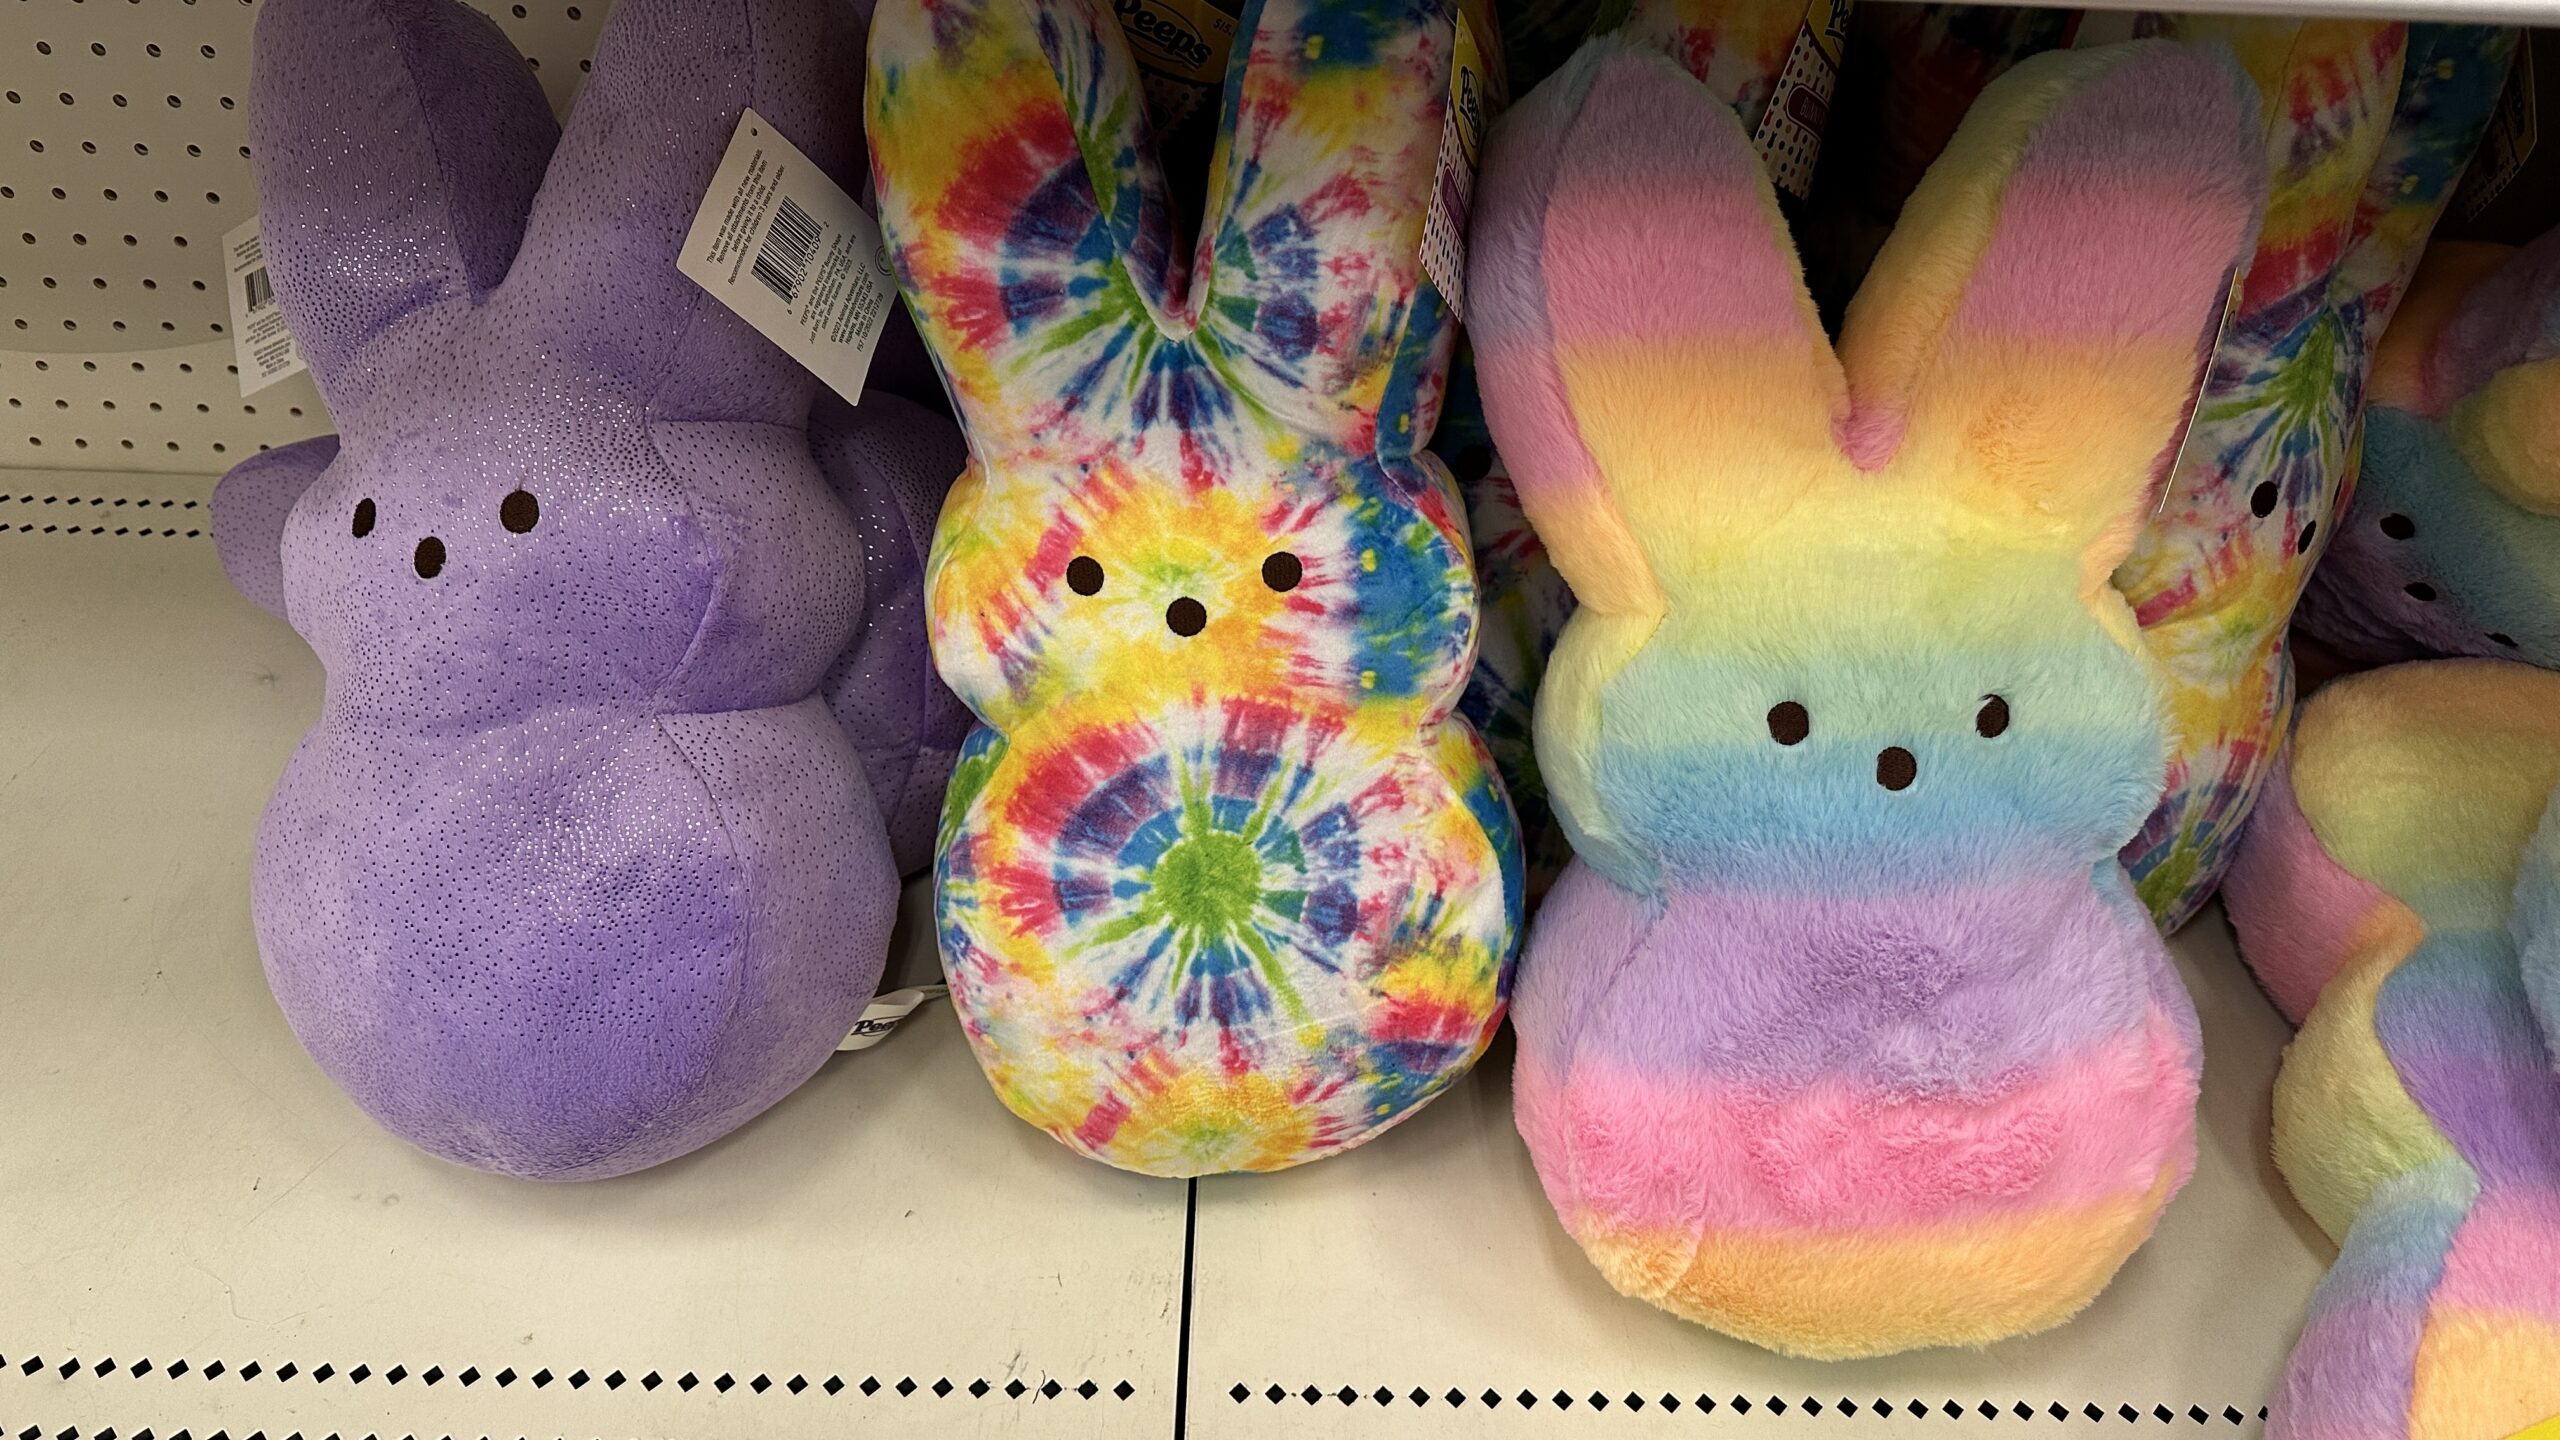 Target is Selling $15 Peeps Bunny Plushes That Are Perfect for Easter Baskets